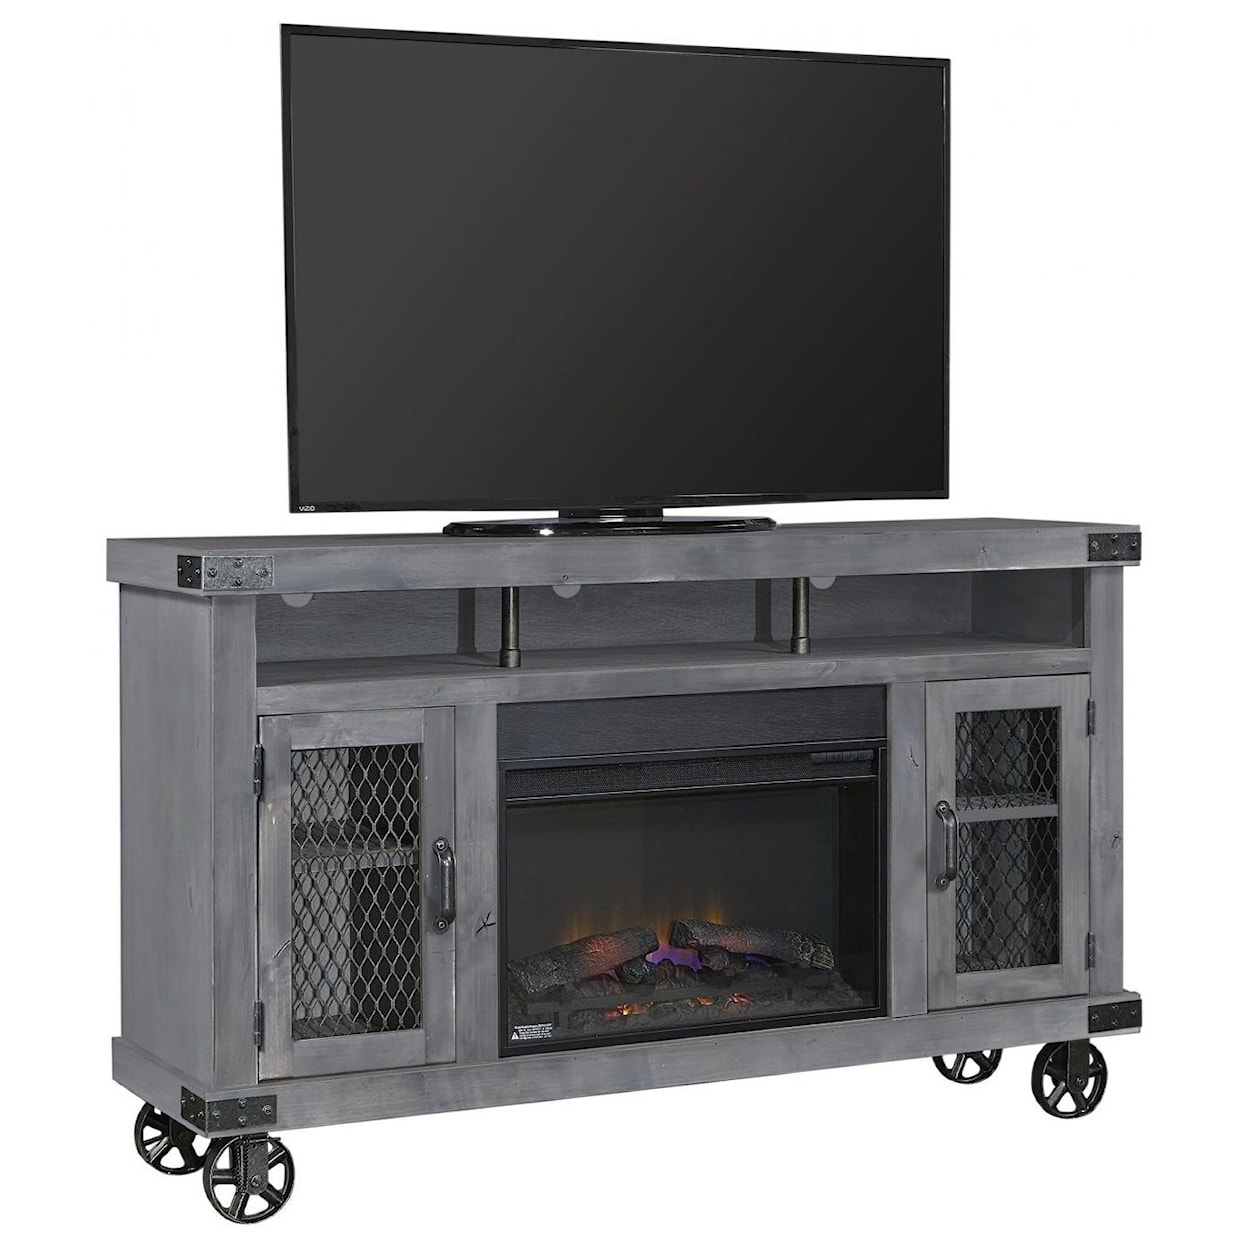 Aspenhome Industrial 62" Fireplace Console